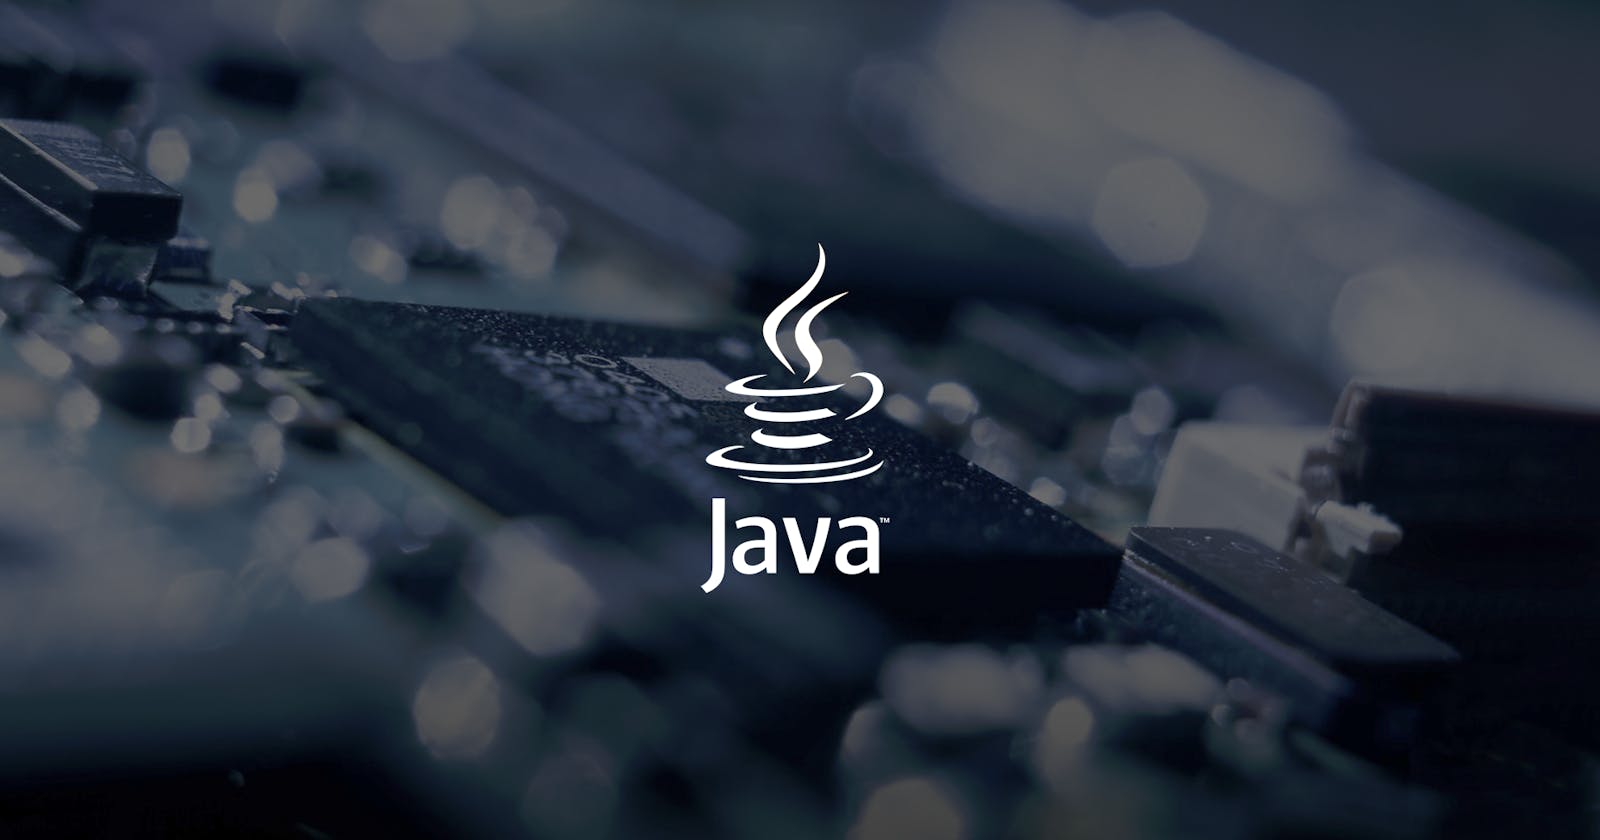 An Overview of the Java Ecosystem